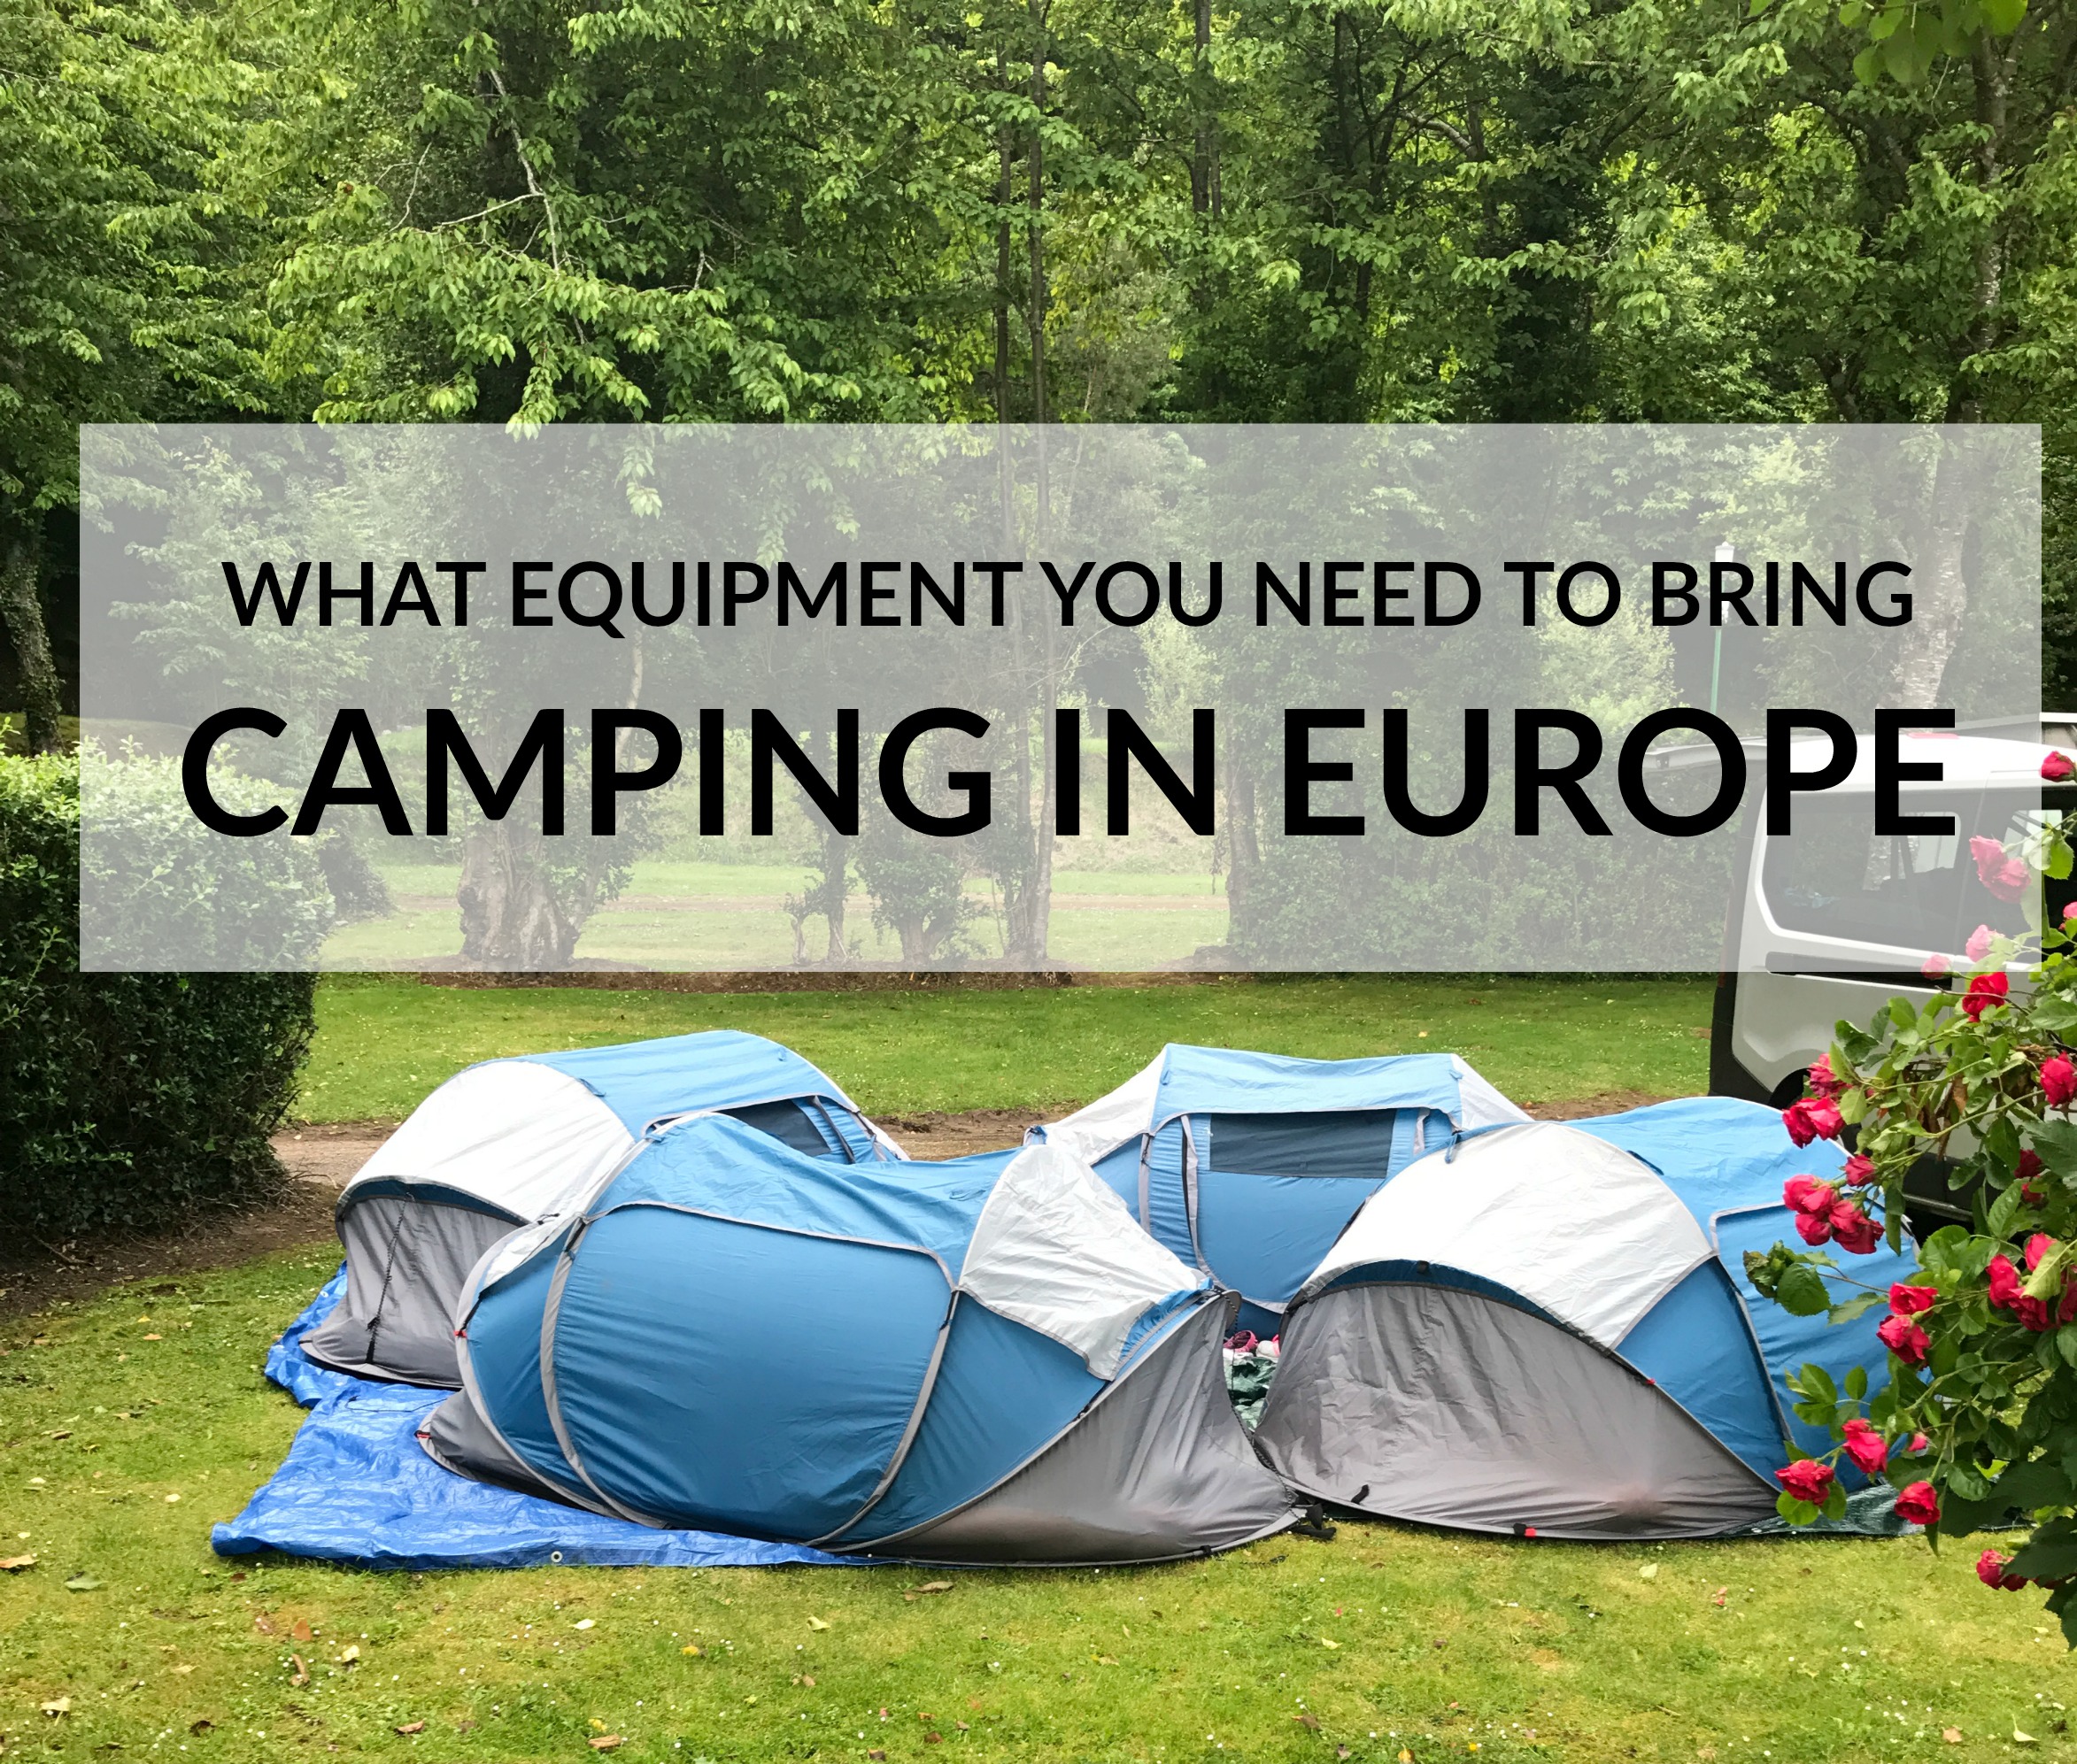 Camping in Europe